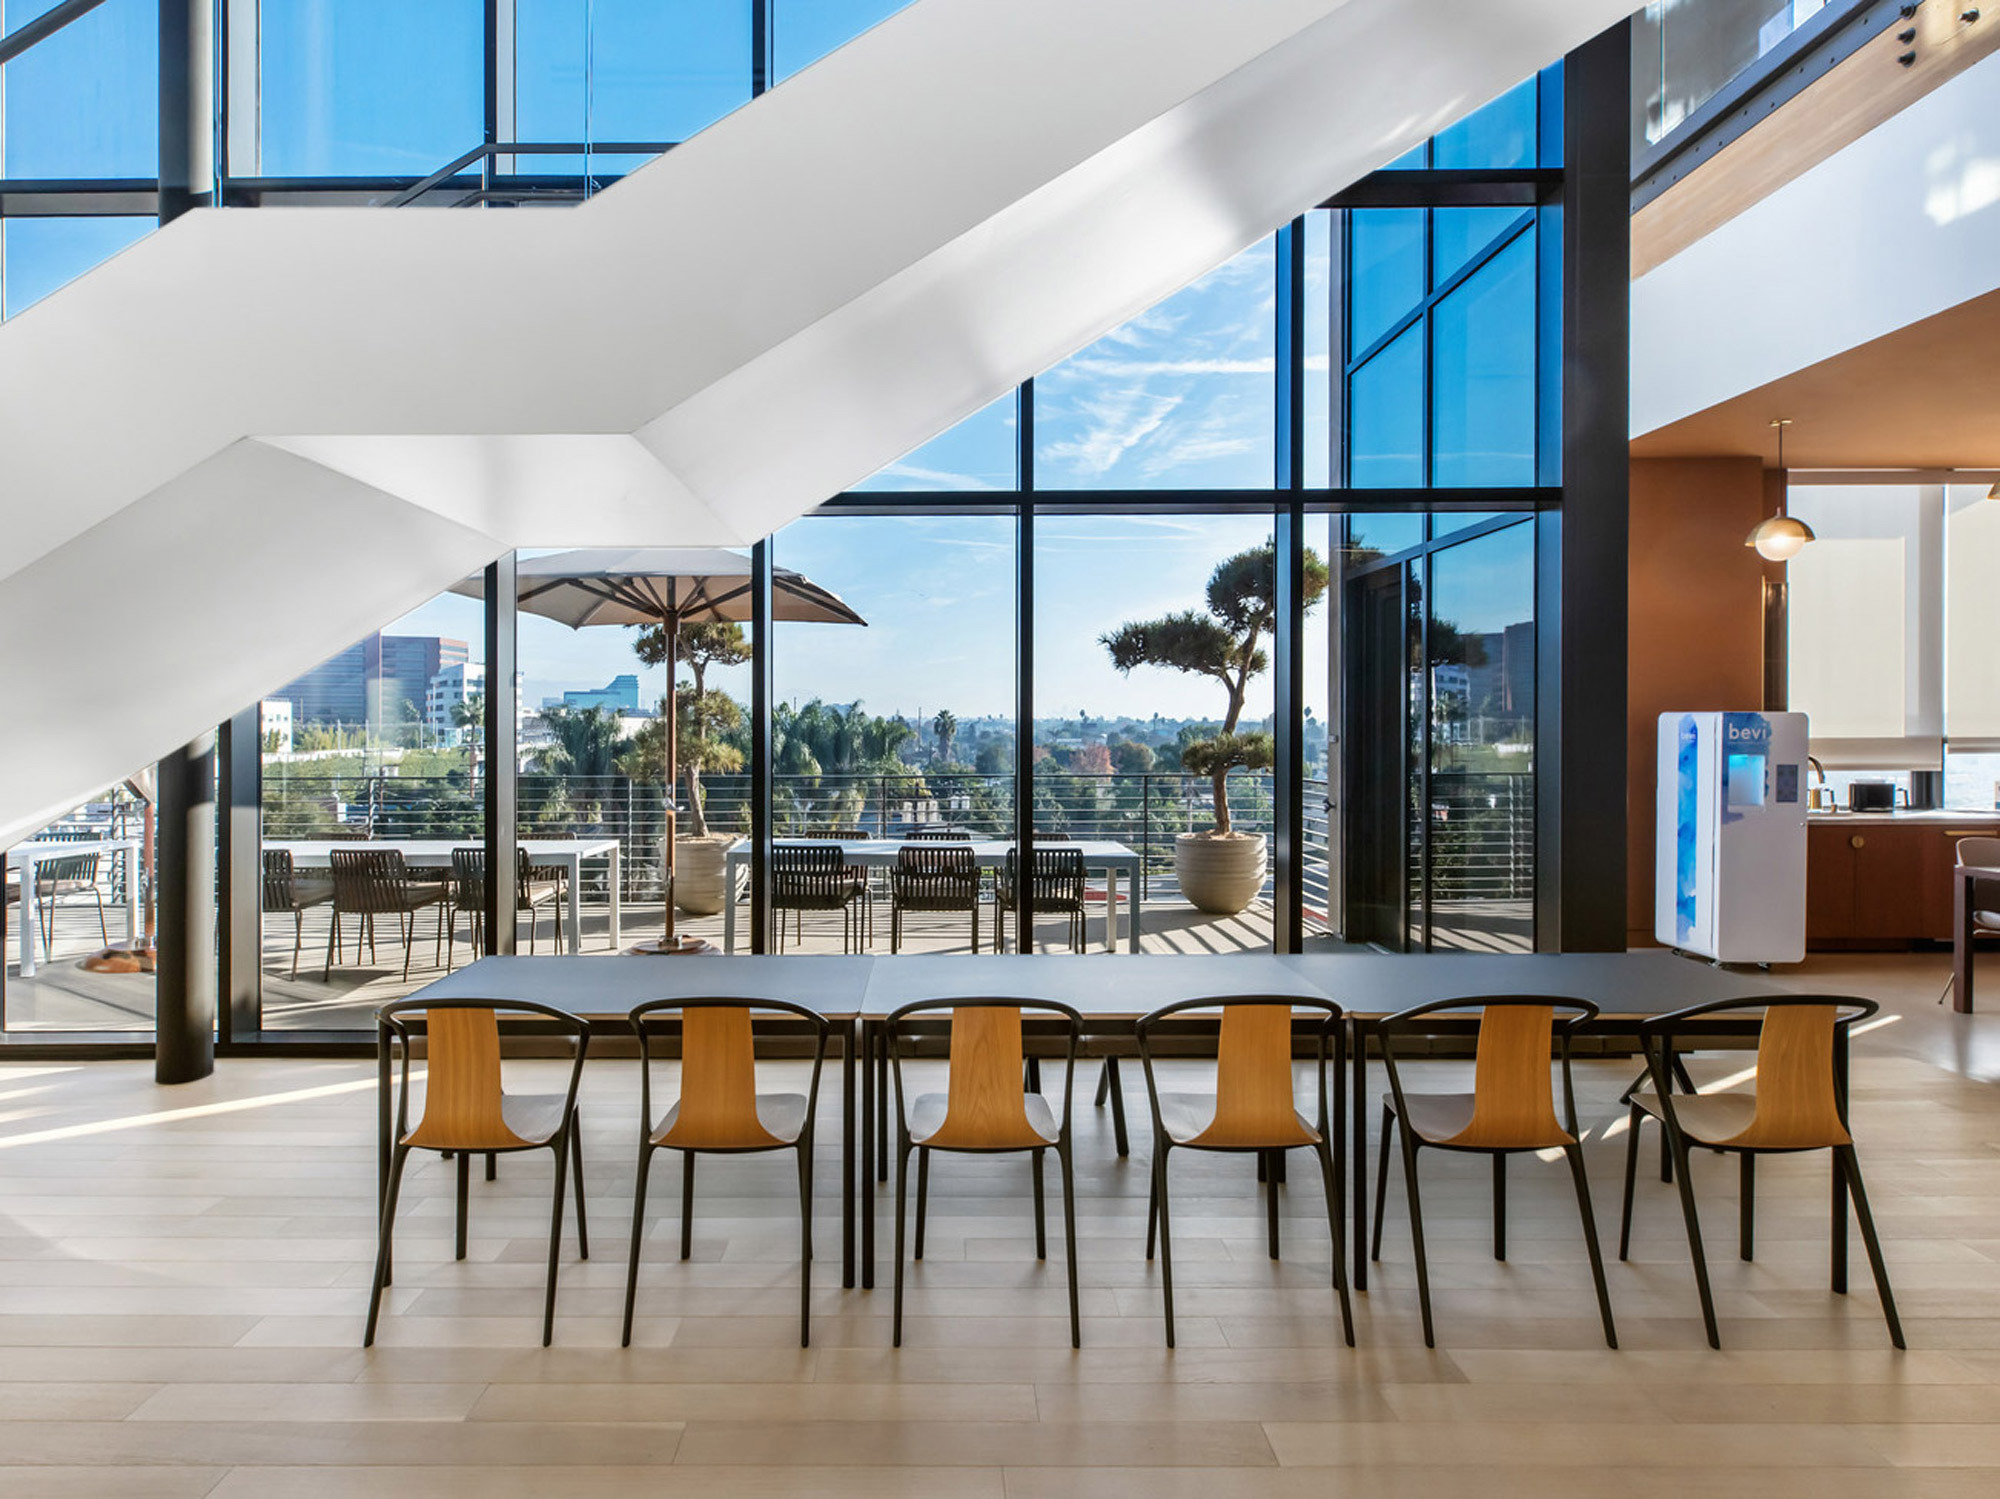 Sleek, modern interior with a floating white staircase, hardwood floors, and expansive windows offering abundant natural light and exterior views. Mustard-yellow chairs surround a long communal table, emphasizing a contemporary, collaborative space.